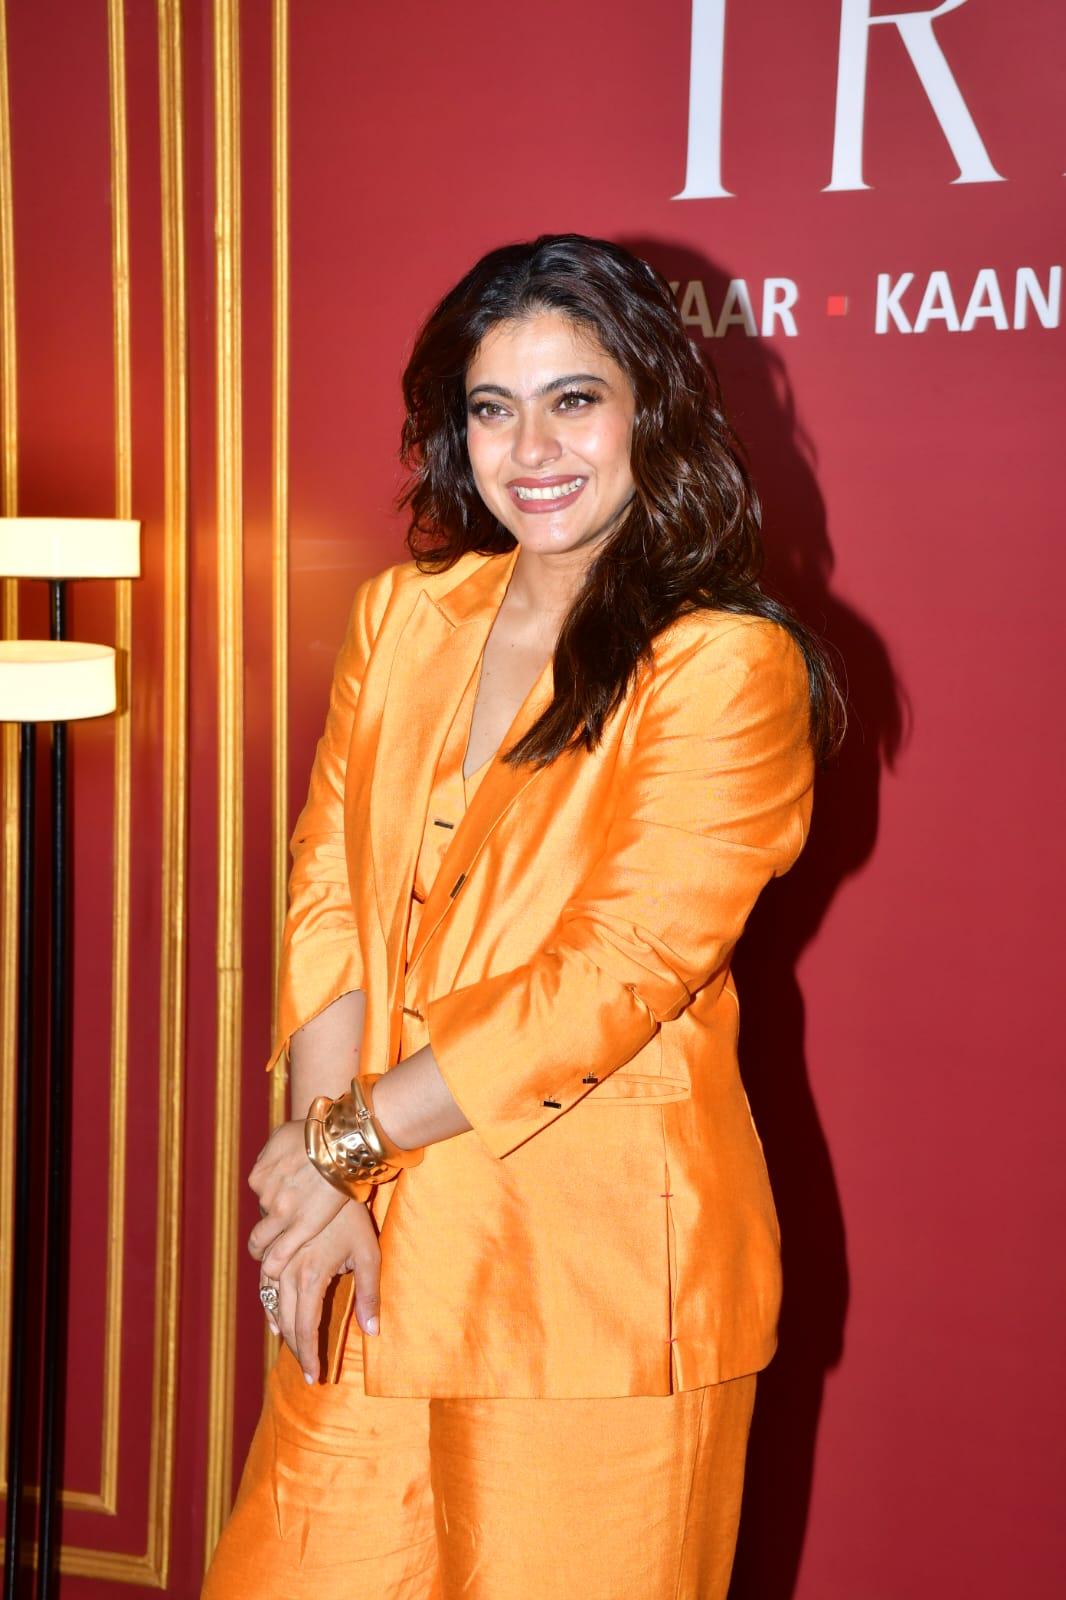 In an orange pant suit, Kajol effortlessly commanded attention with her bold and vibrant choice.